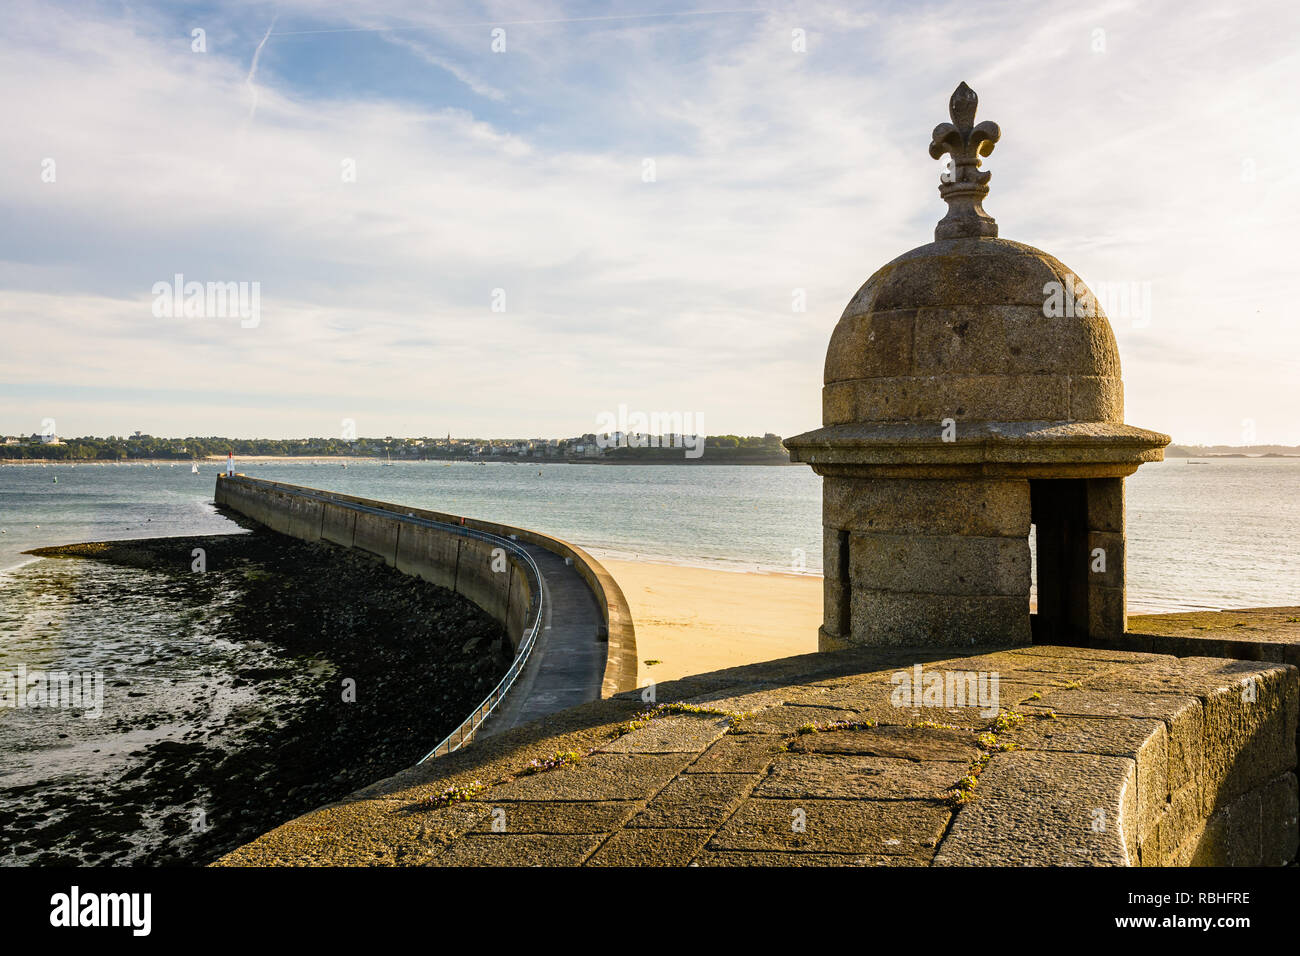 The breakwater of the old town of Saint-Malo in Brittany, seen at low tide and sunset from the city wall, with a granite turret in the foreground. Stock Photo